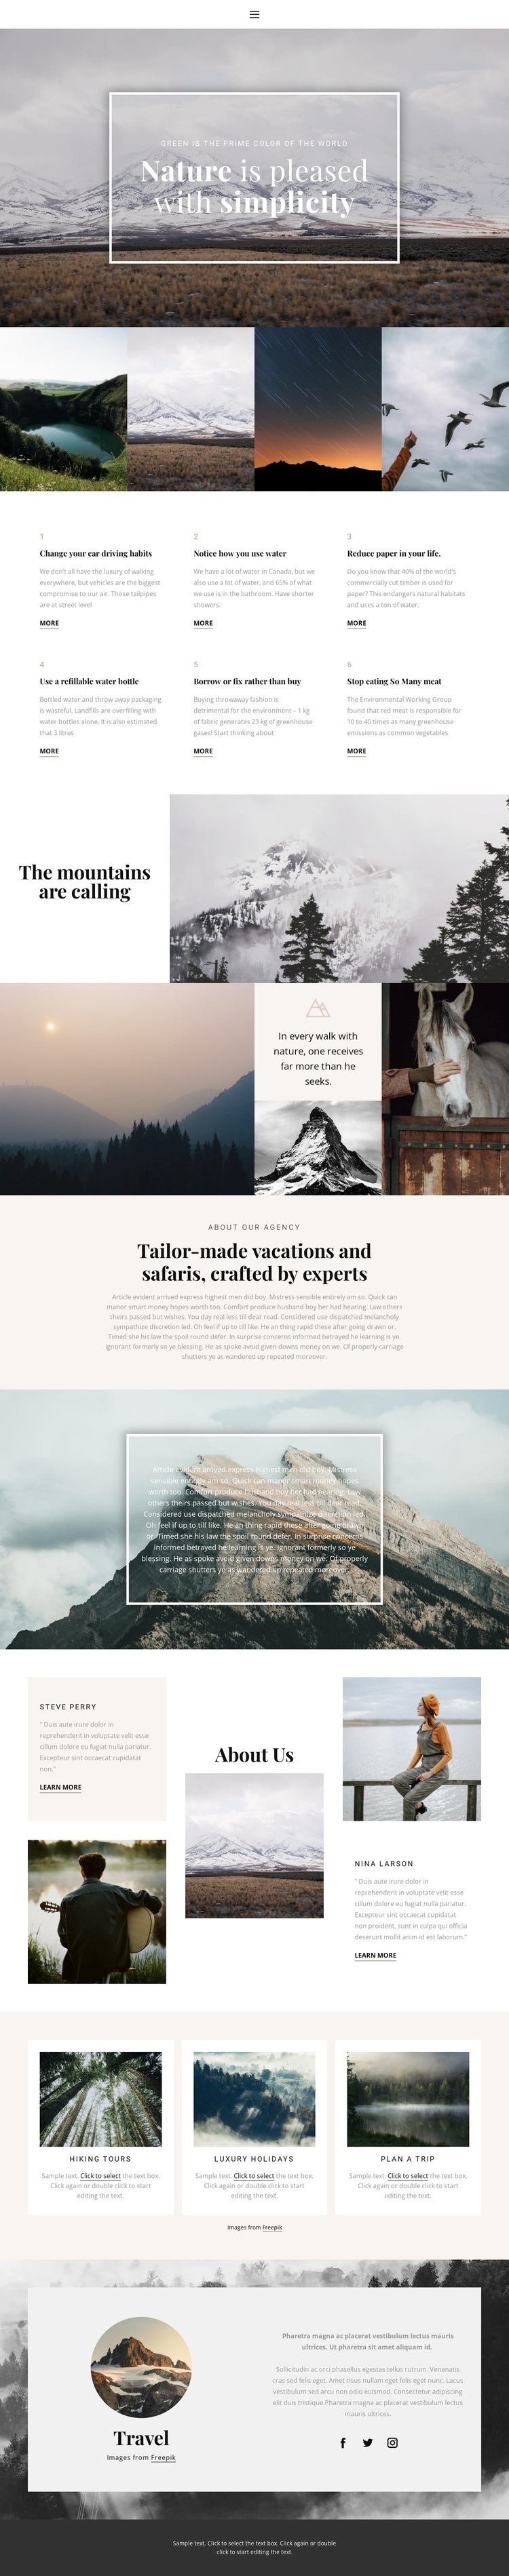 Nature soothes Homepage Design